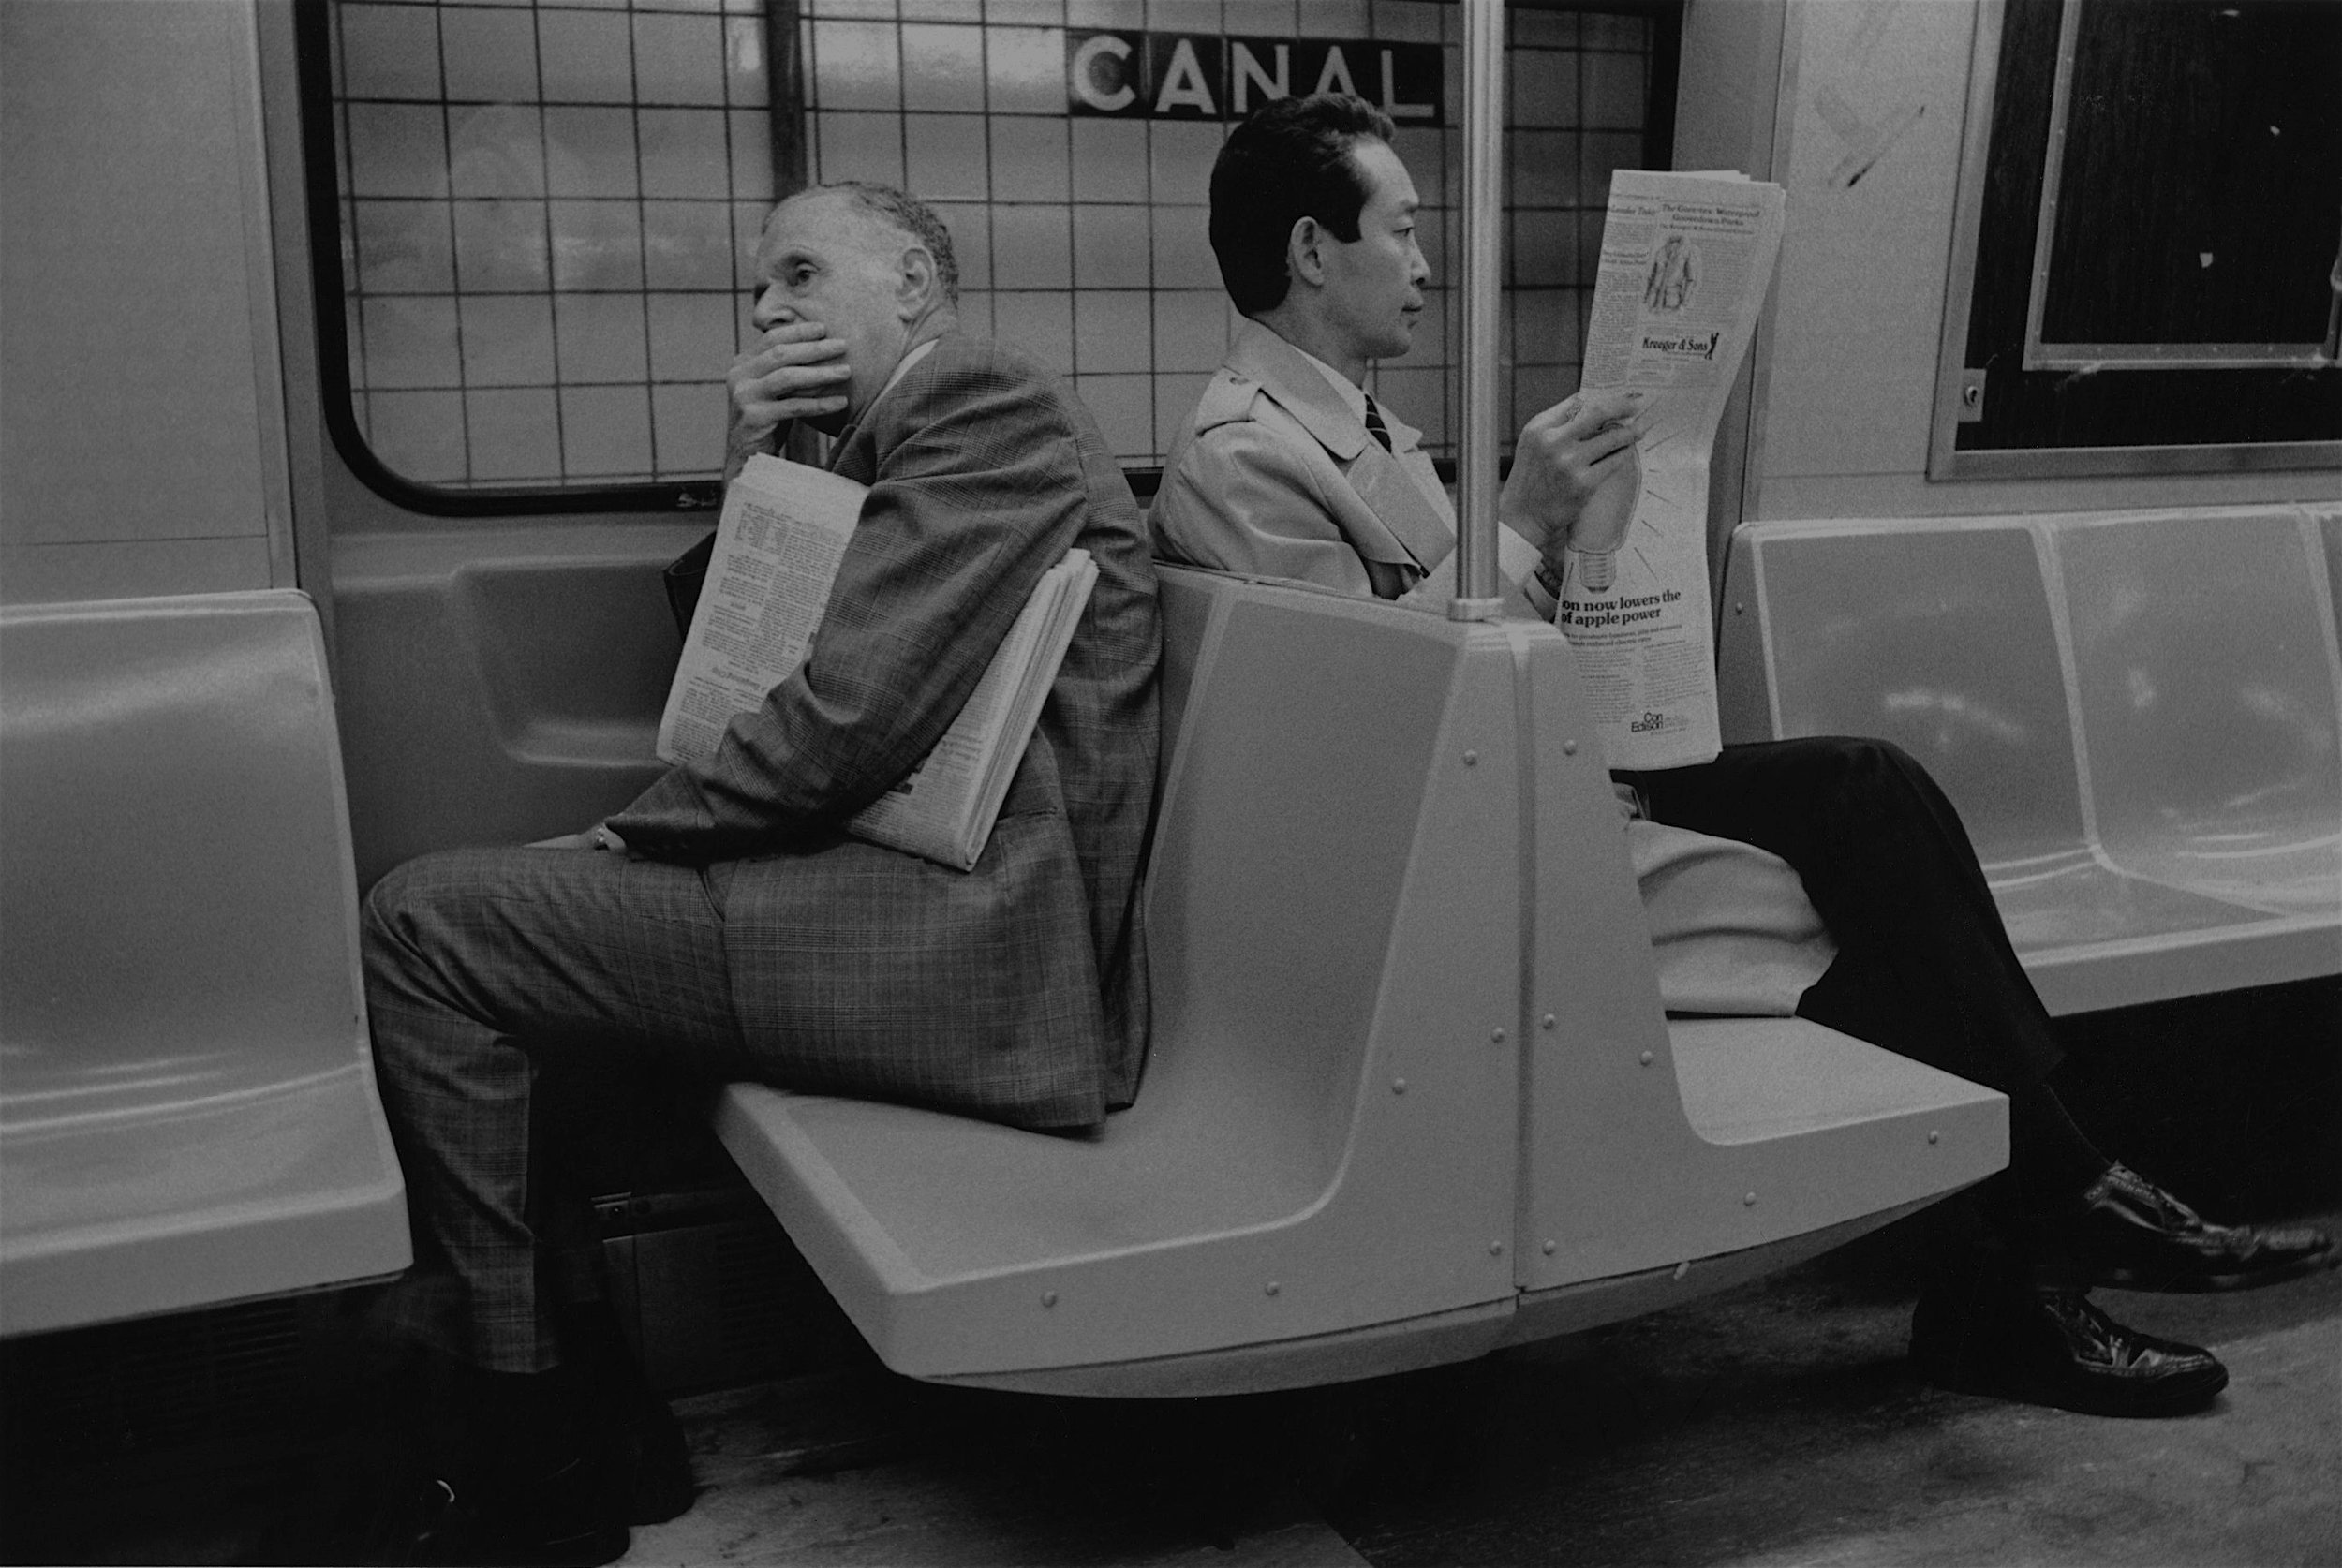 two times readers at canal st. subway, nyc, early 1980’s